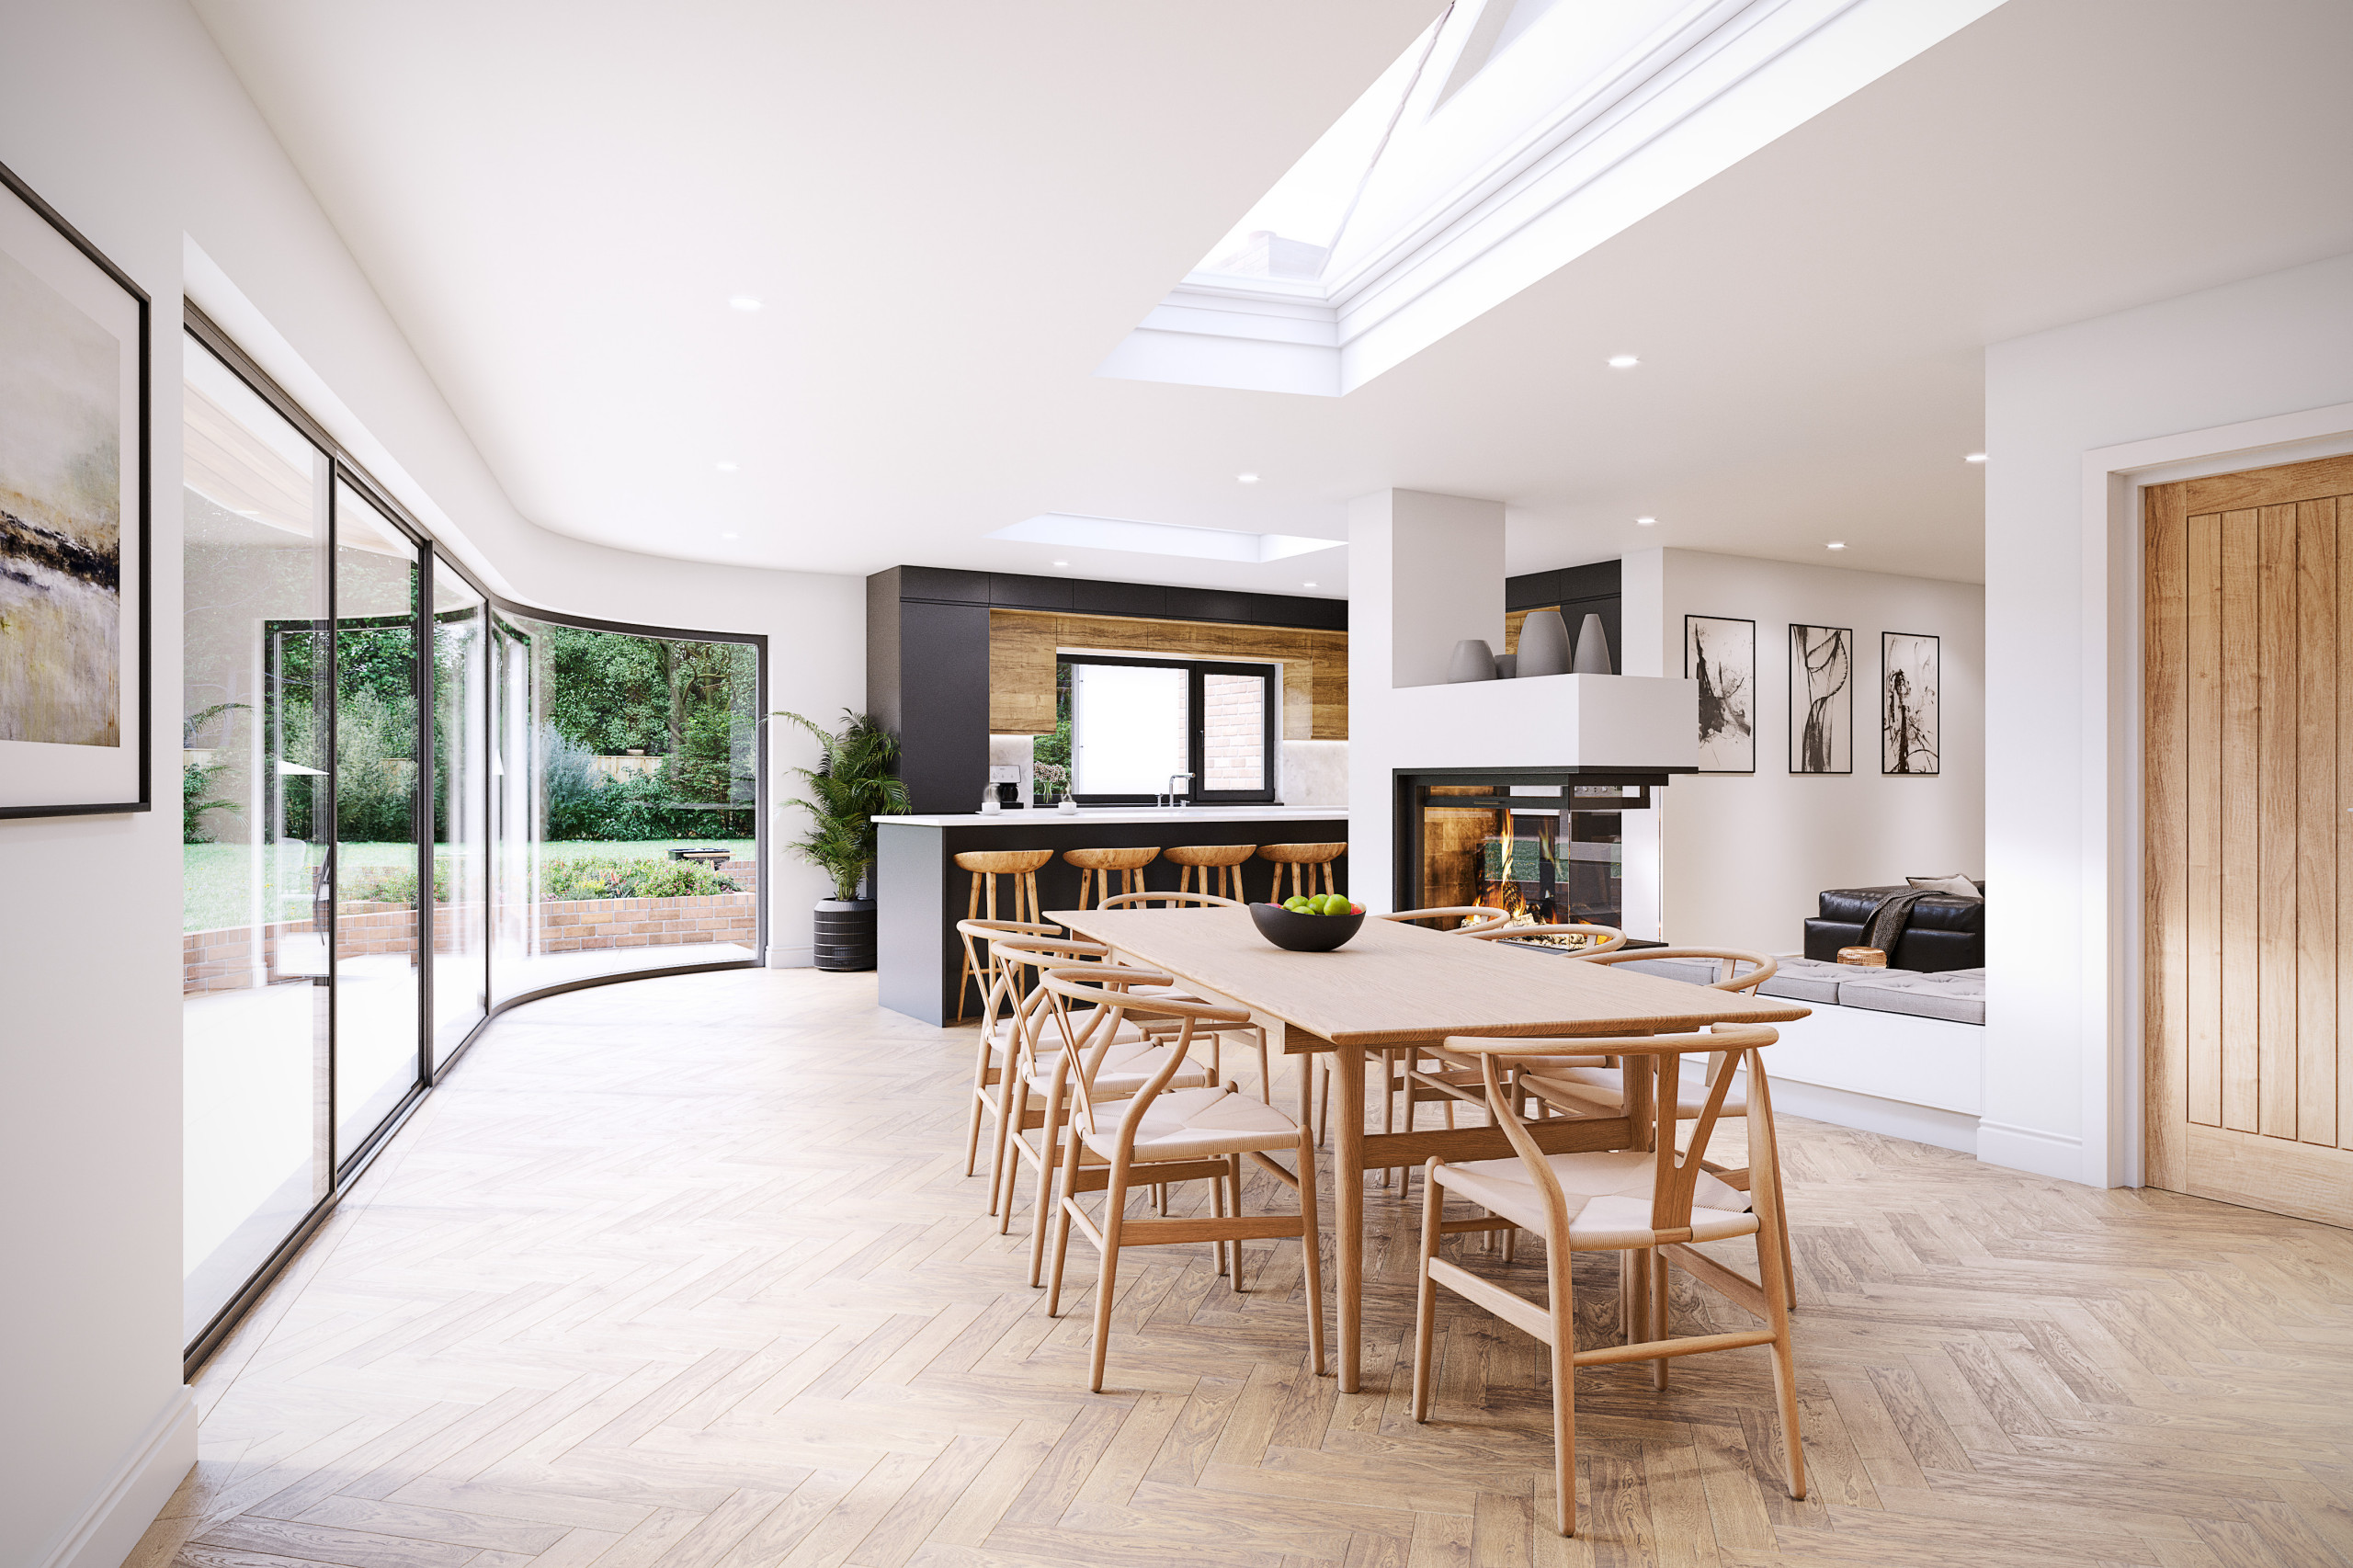 View of open-plan dining and kitchen space